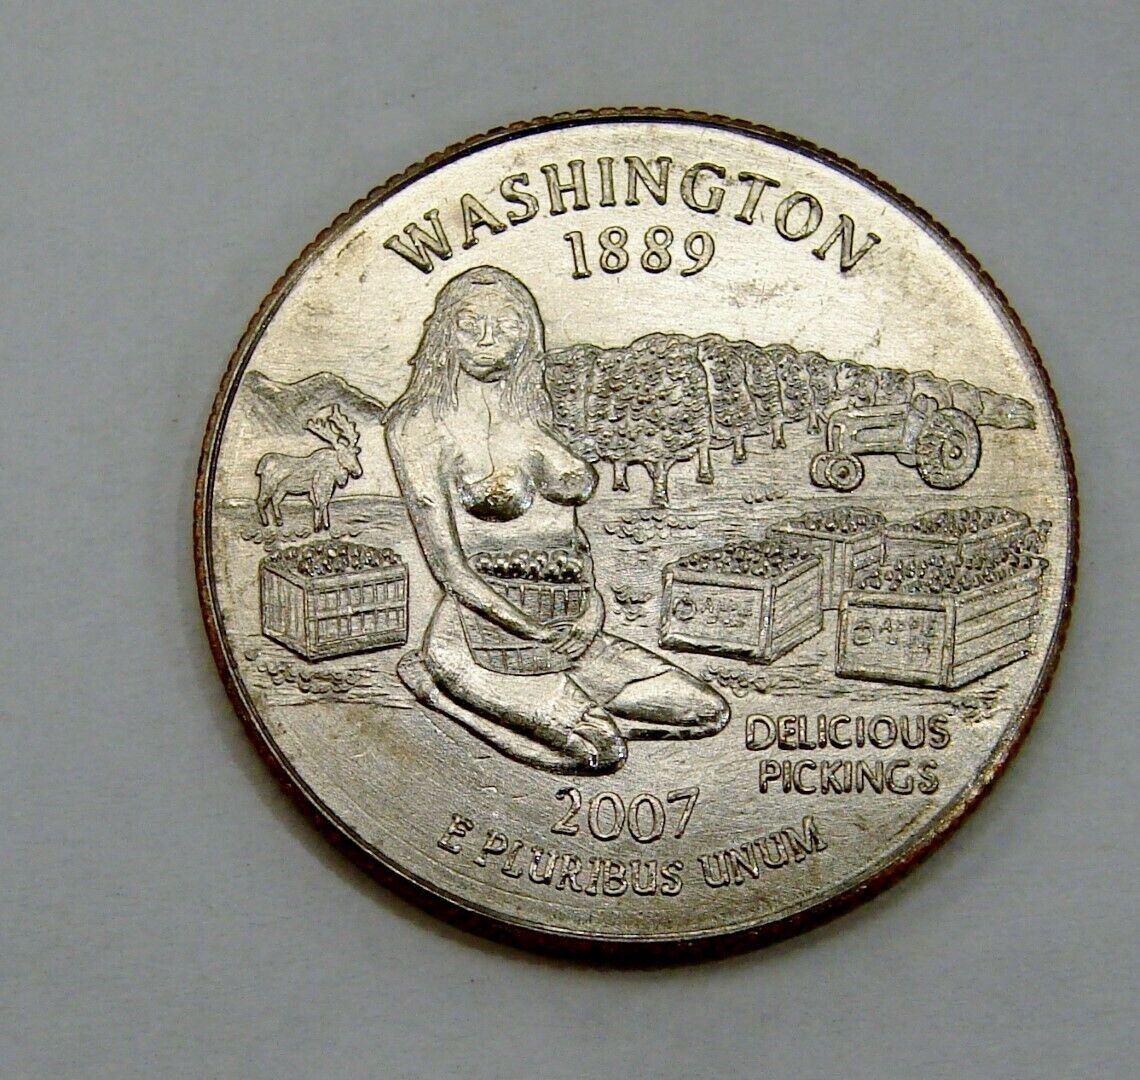 Washington - Delicious Pickings - Adult Themed "sexy Quarter"